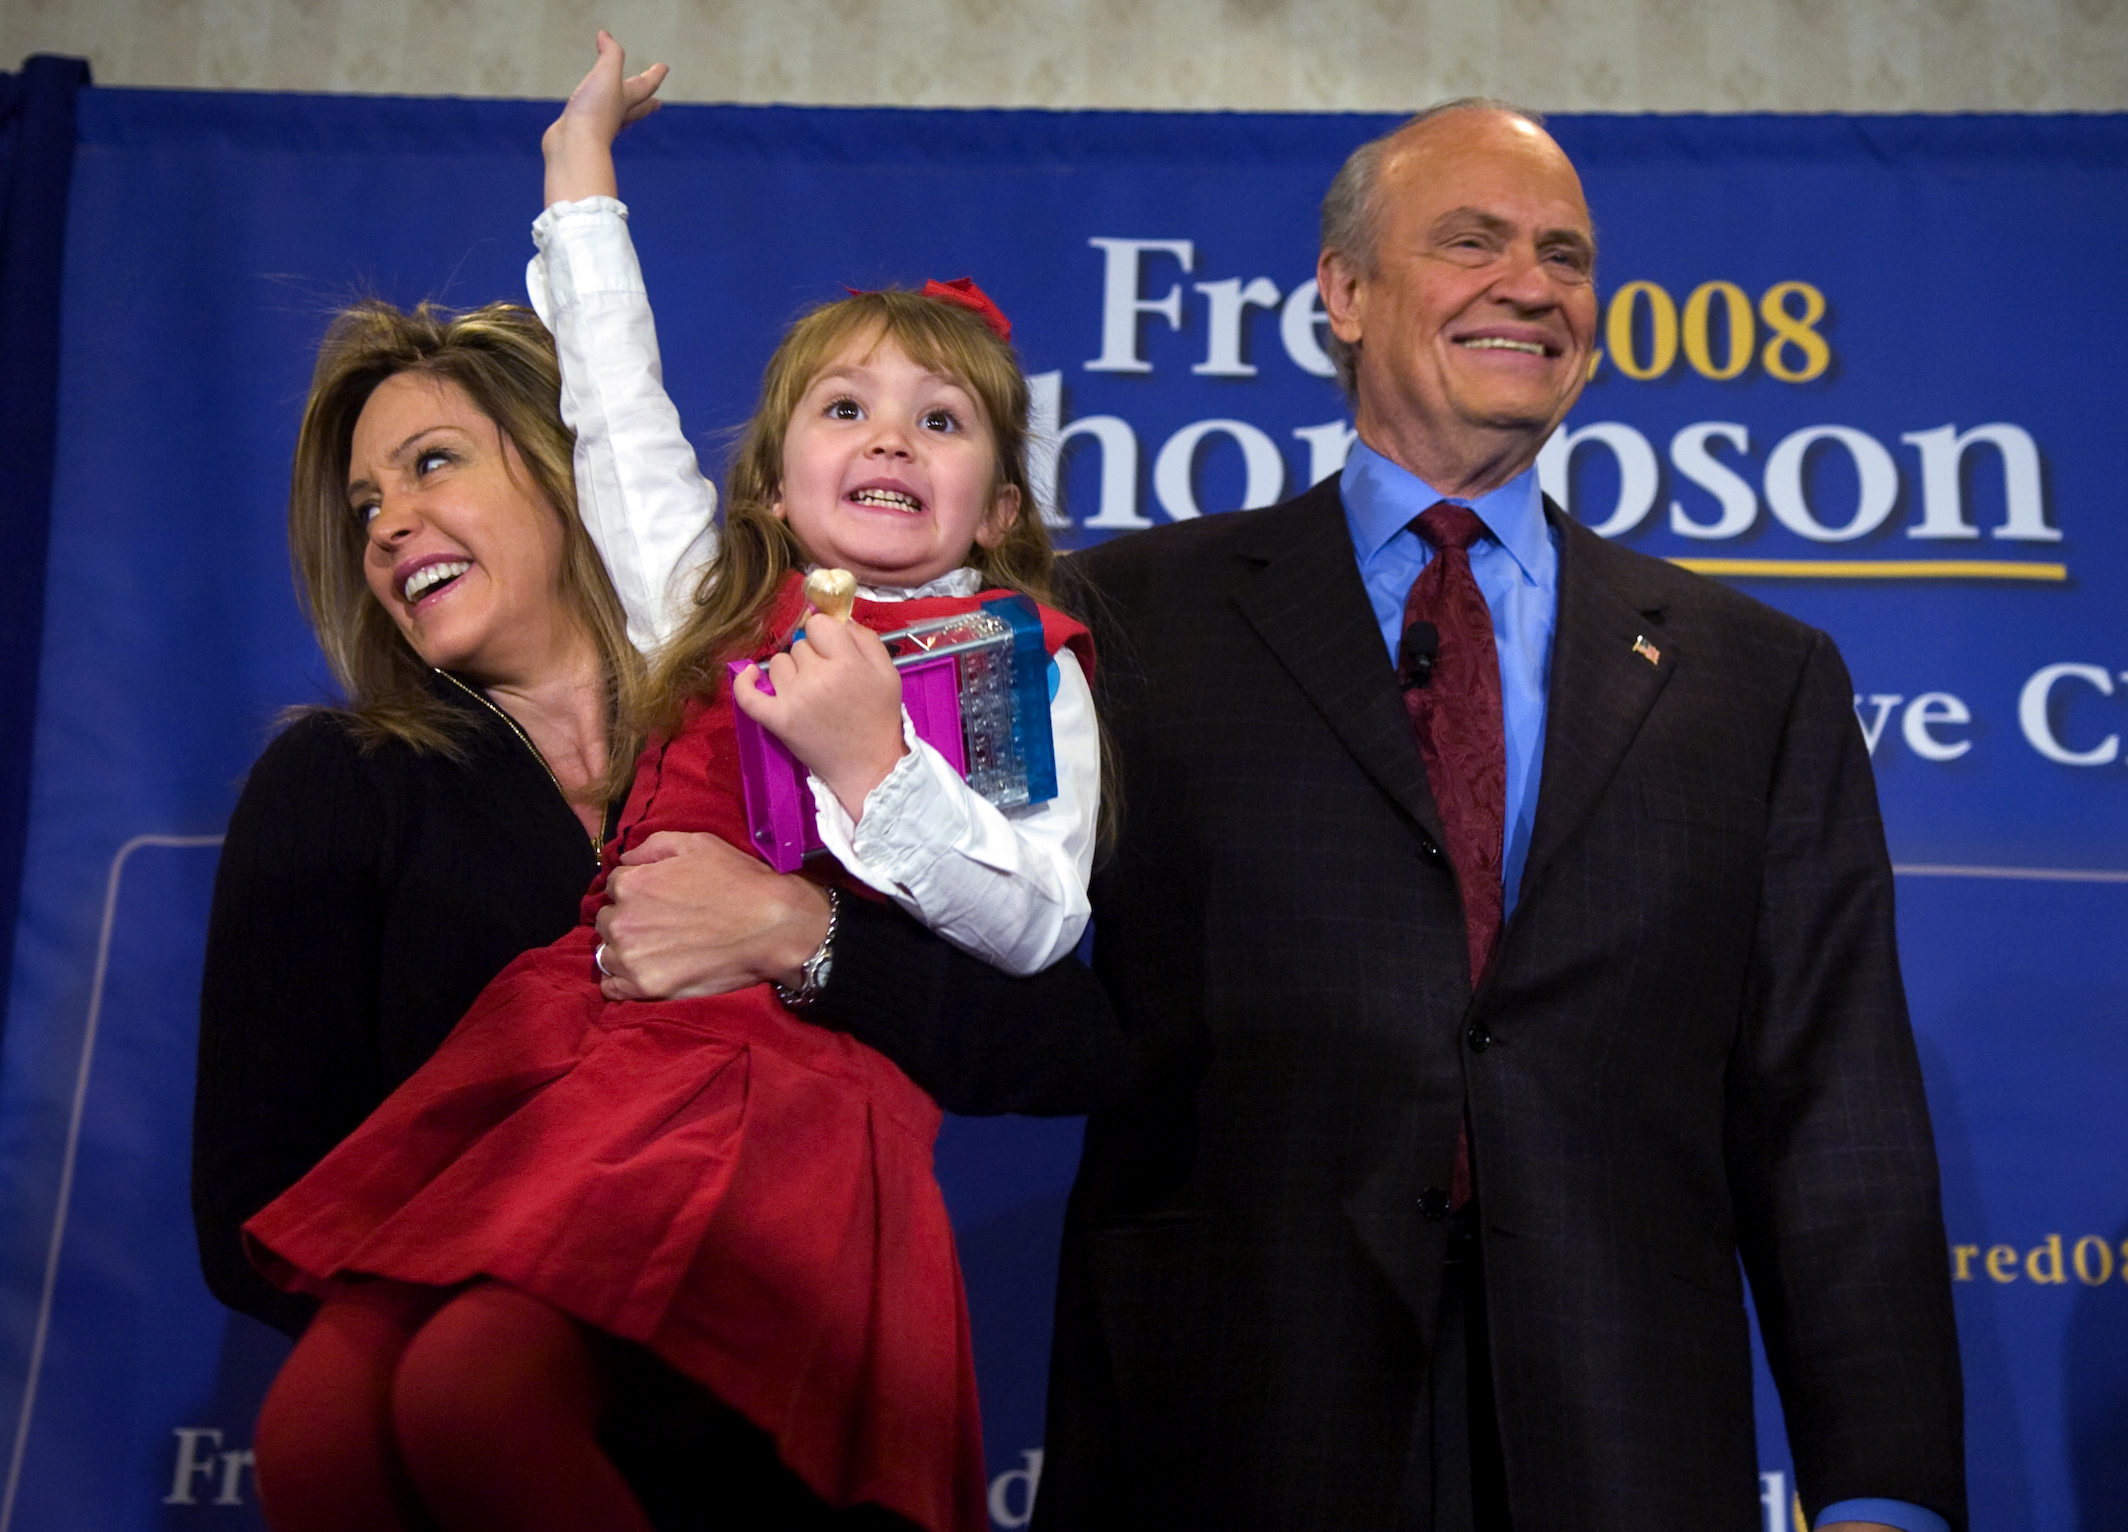 Republican presidential candidate, Fred Thompson is joined on stage by his wife, Jeri, holding 4-year-old daughter Hayden, before speaking to supporters on Caucus Day in Des Moines, Iowa, on Jan. 3, 2008.